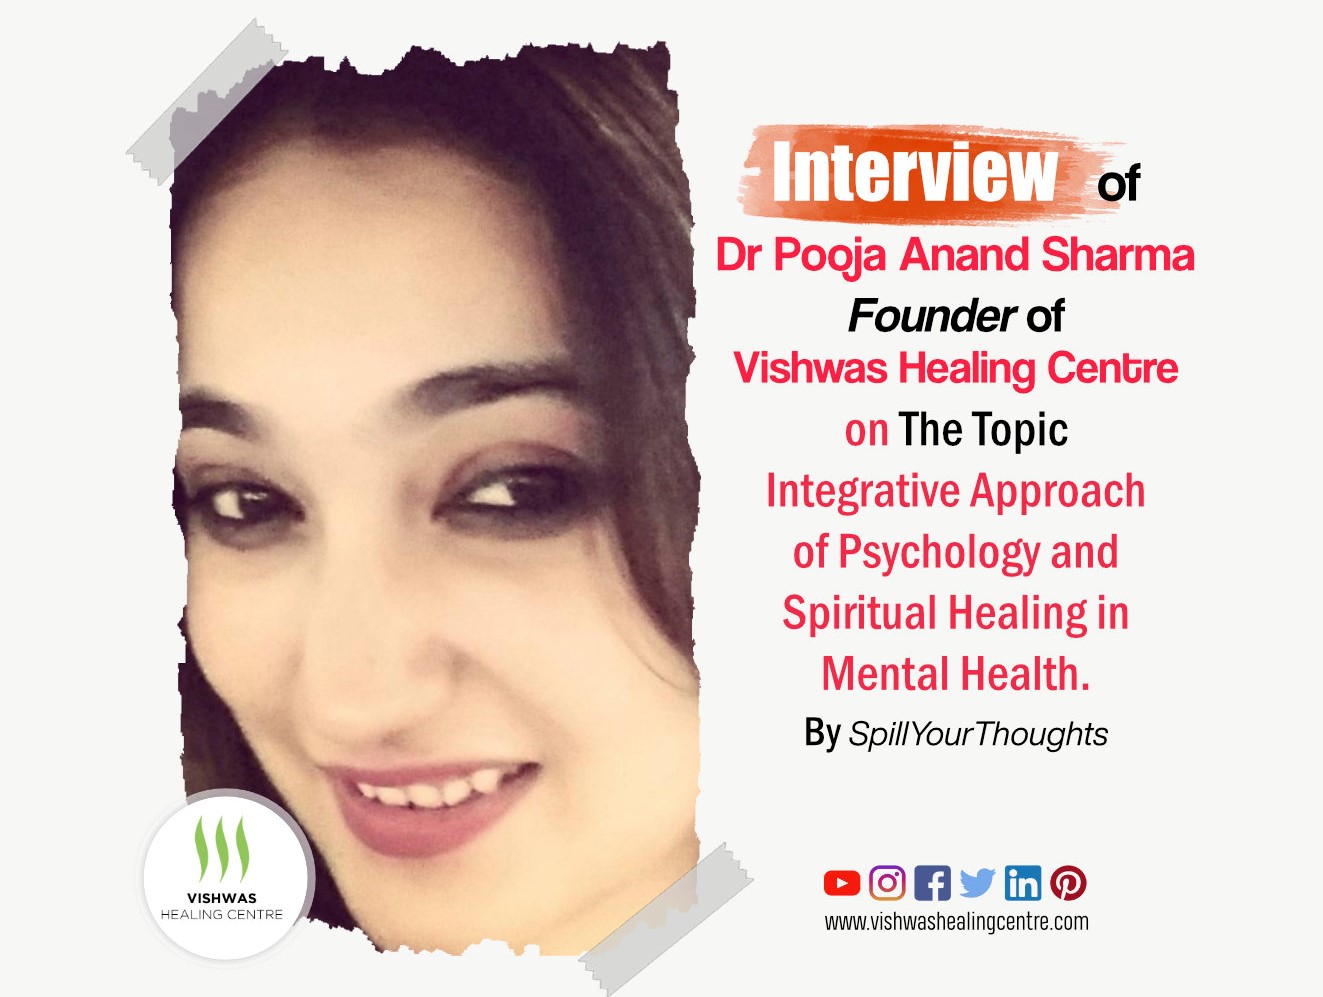 Interview of Dr Pooja Anand Sharma on The topic integrative approach of psychology and spiritual healing in mental health